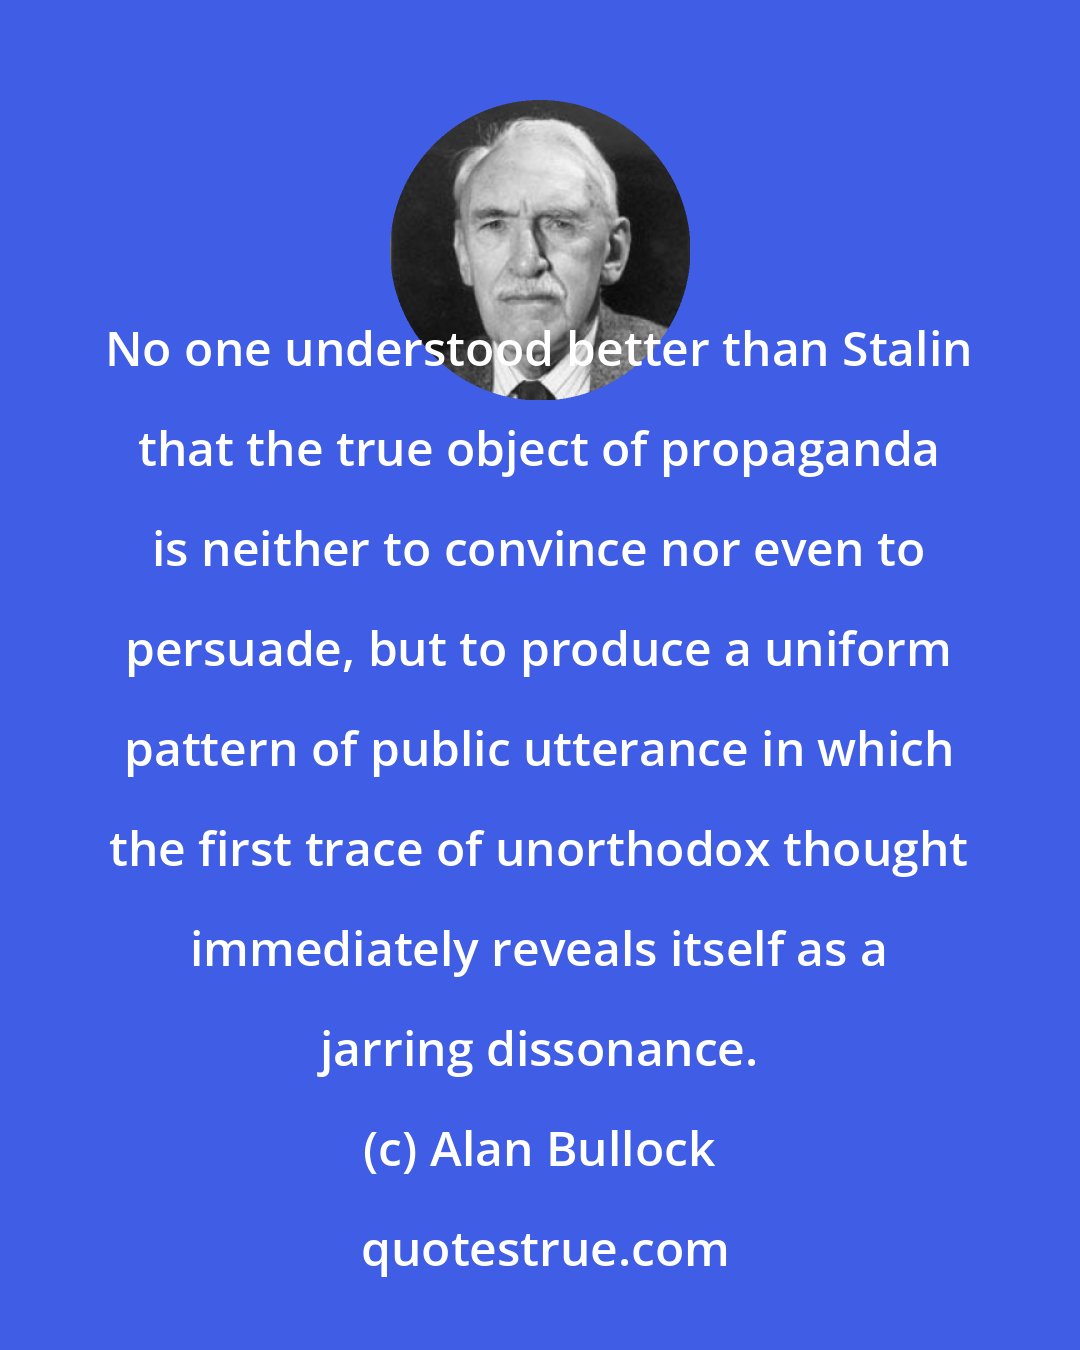 Alan Bullock: No one understood better than Stalin that the true object of propaganda is neither to convince nor even to persuade, but to produce a uniform pattern of public utterance in which the first trace of unorthodox thought immediately reveals itself as a jarring dissonance.